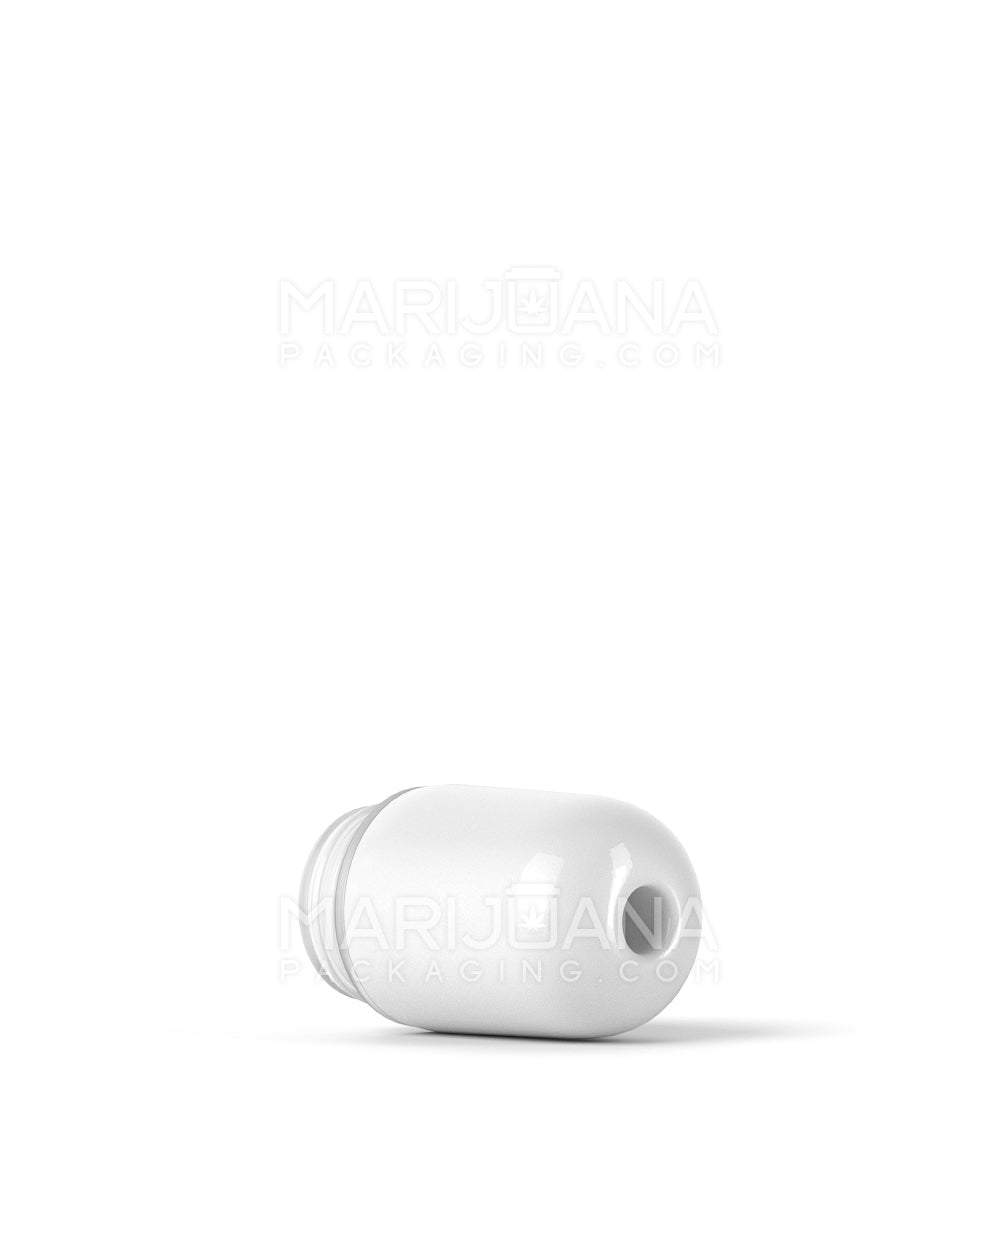 AVD | Round Vape Mouthpiece for Glass Cartridges | White Ceramic - Eazy Press - 600 Count - 5